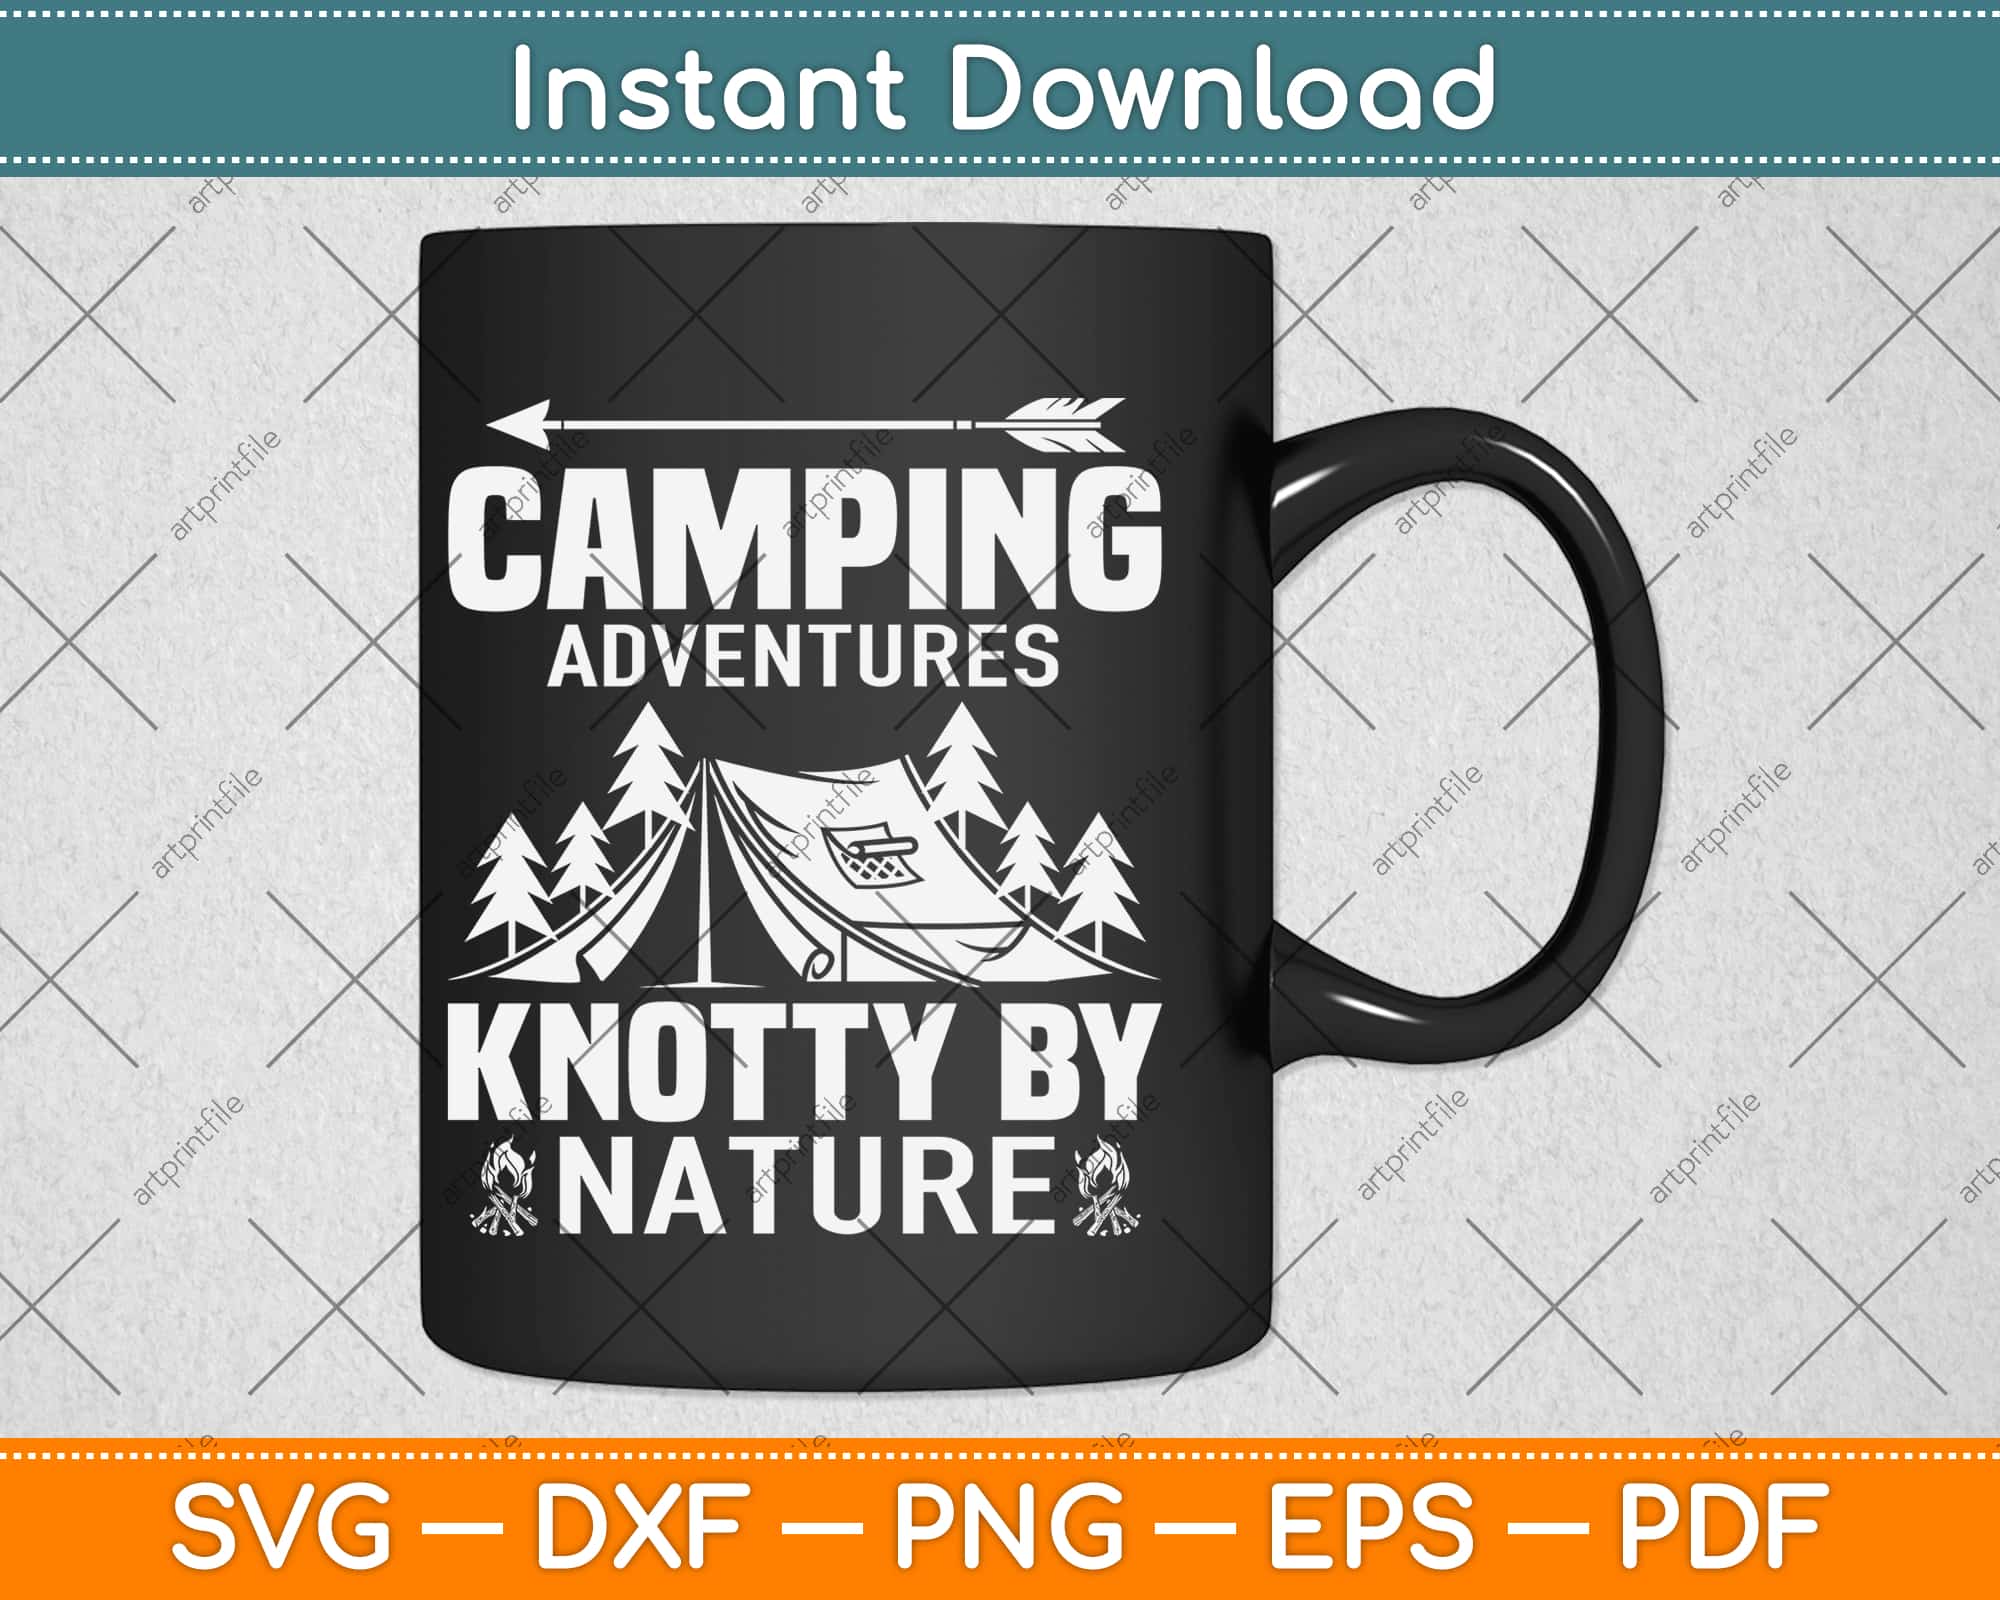 Download Camping Adventures Knotty By Nature Svg Png Dxf Digital Cutting File Artprintfile